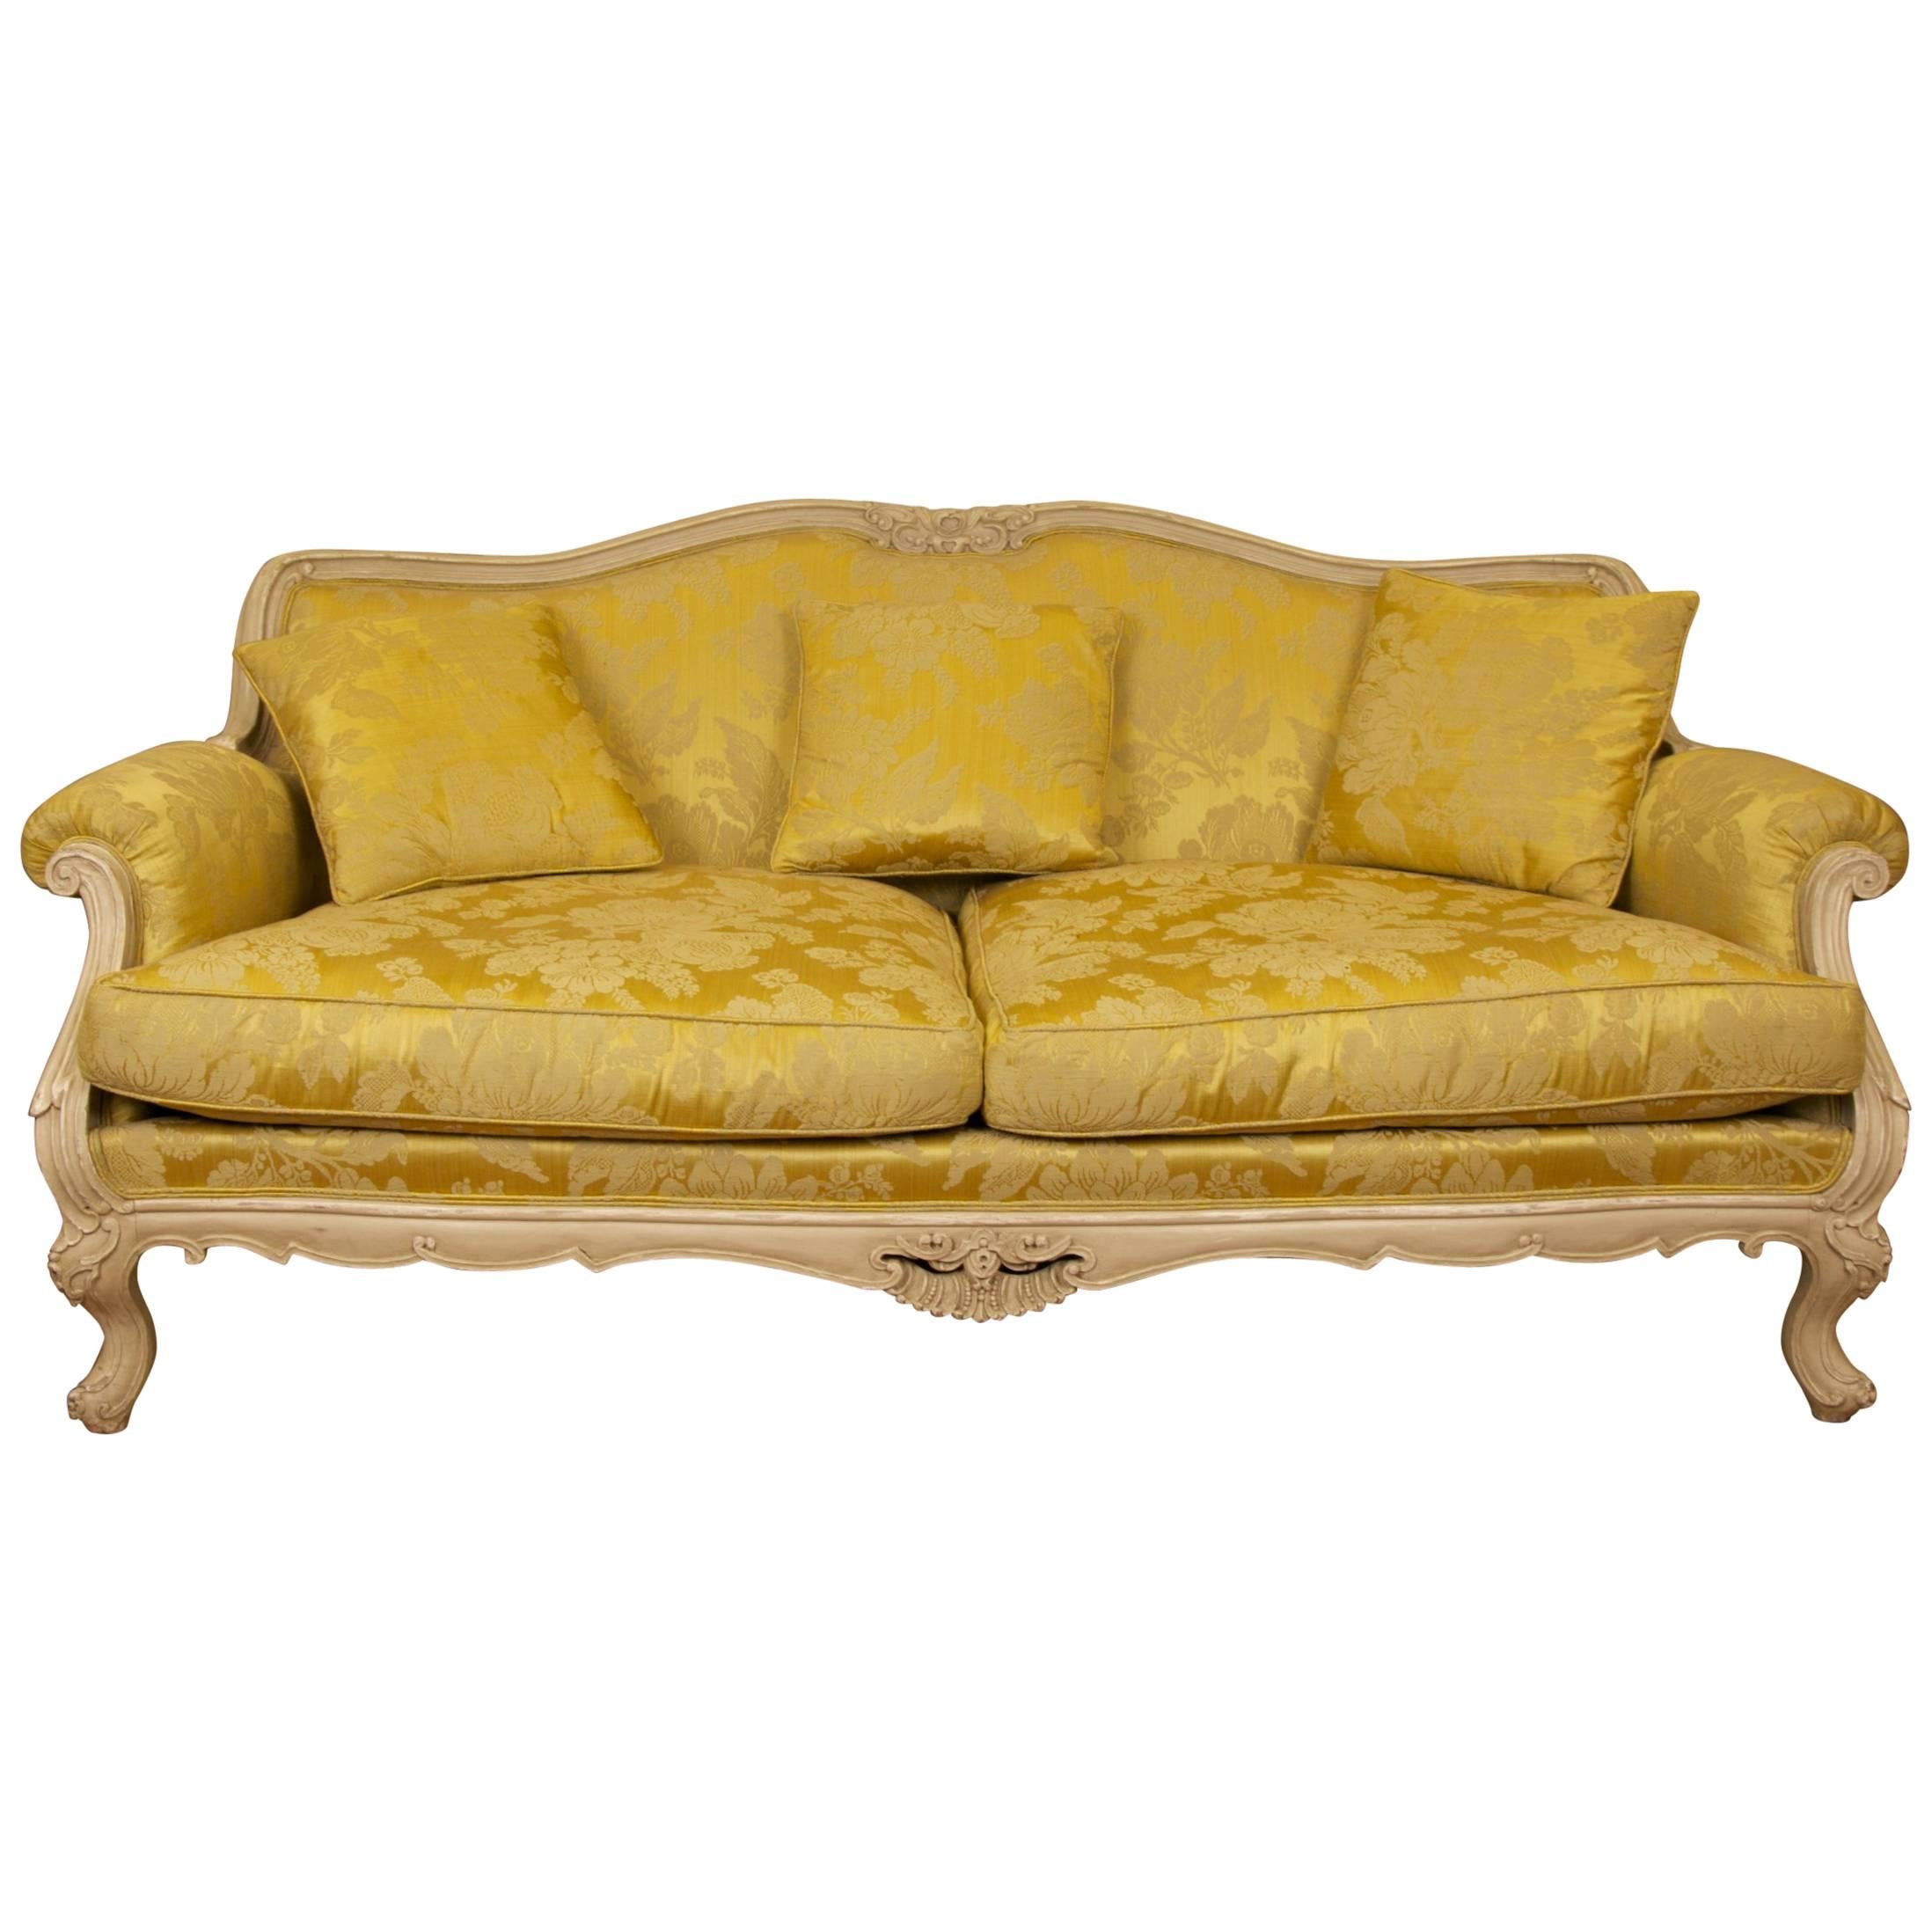 Hand Carved, Louis XV Style Sofa Made By La Maison London